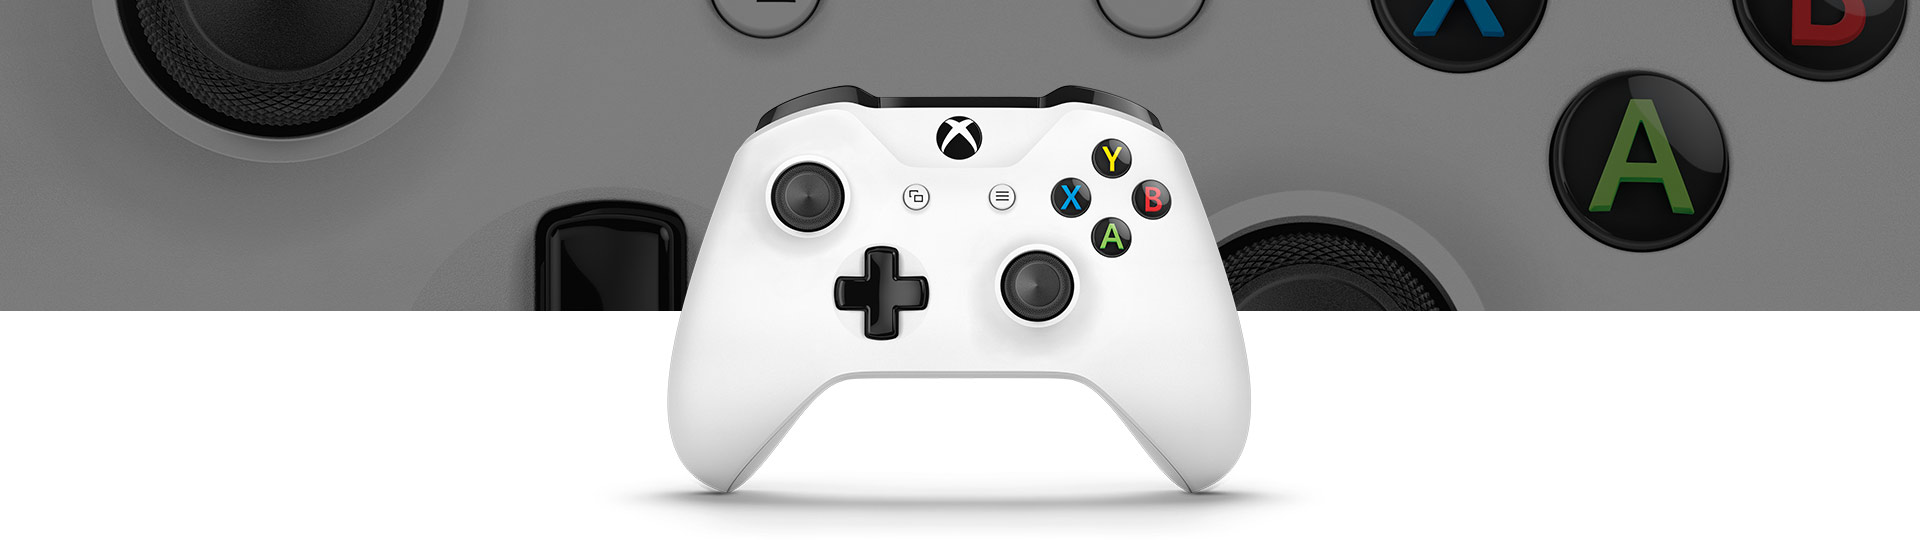 wired xbox one controller